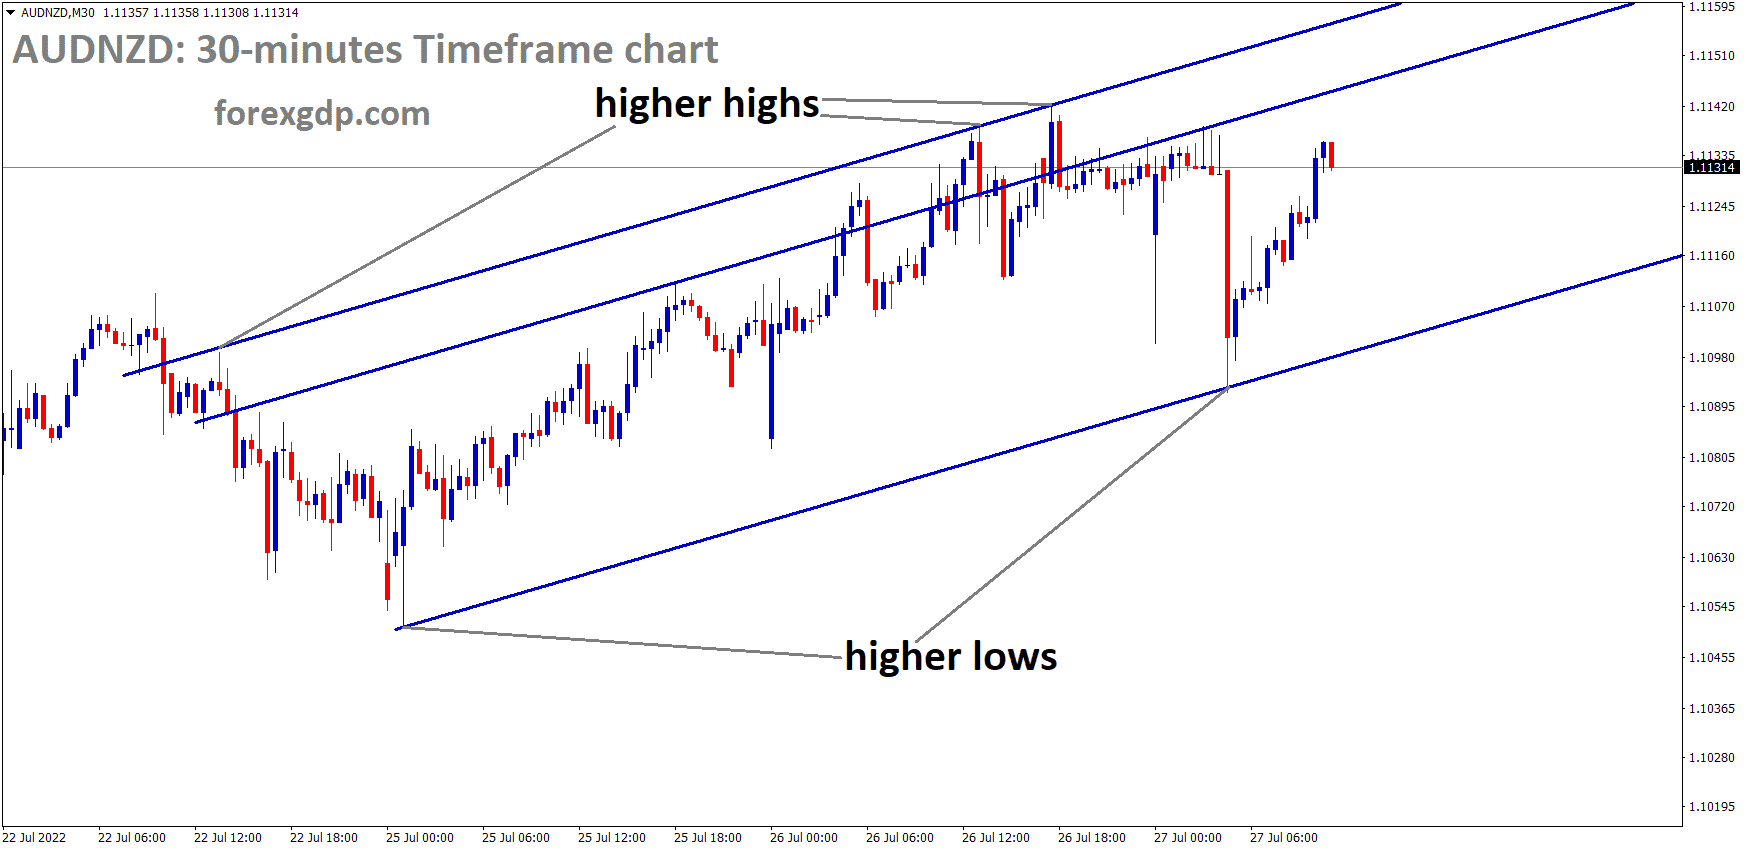 AUDNZD M30 TF analysis Market is moving in an Ascending channel and the Market has rebounded from the higher low area of the channel